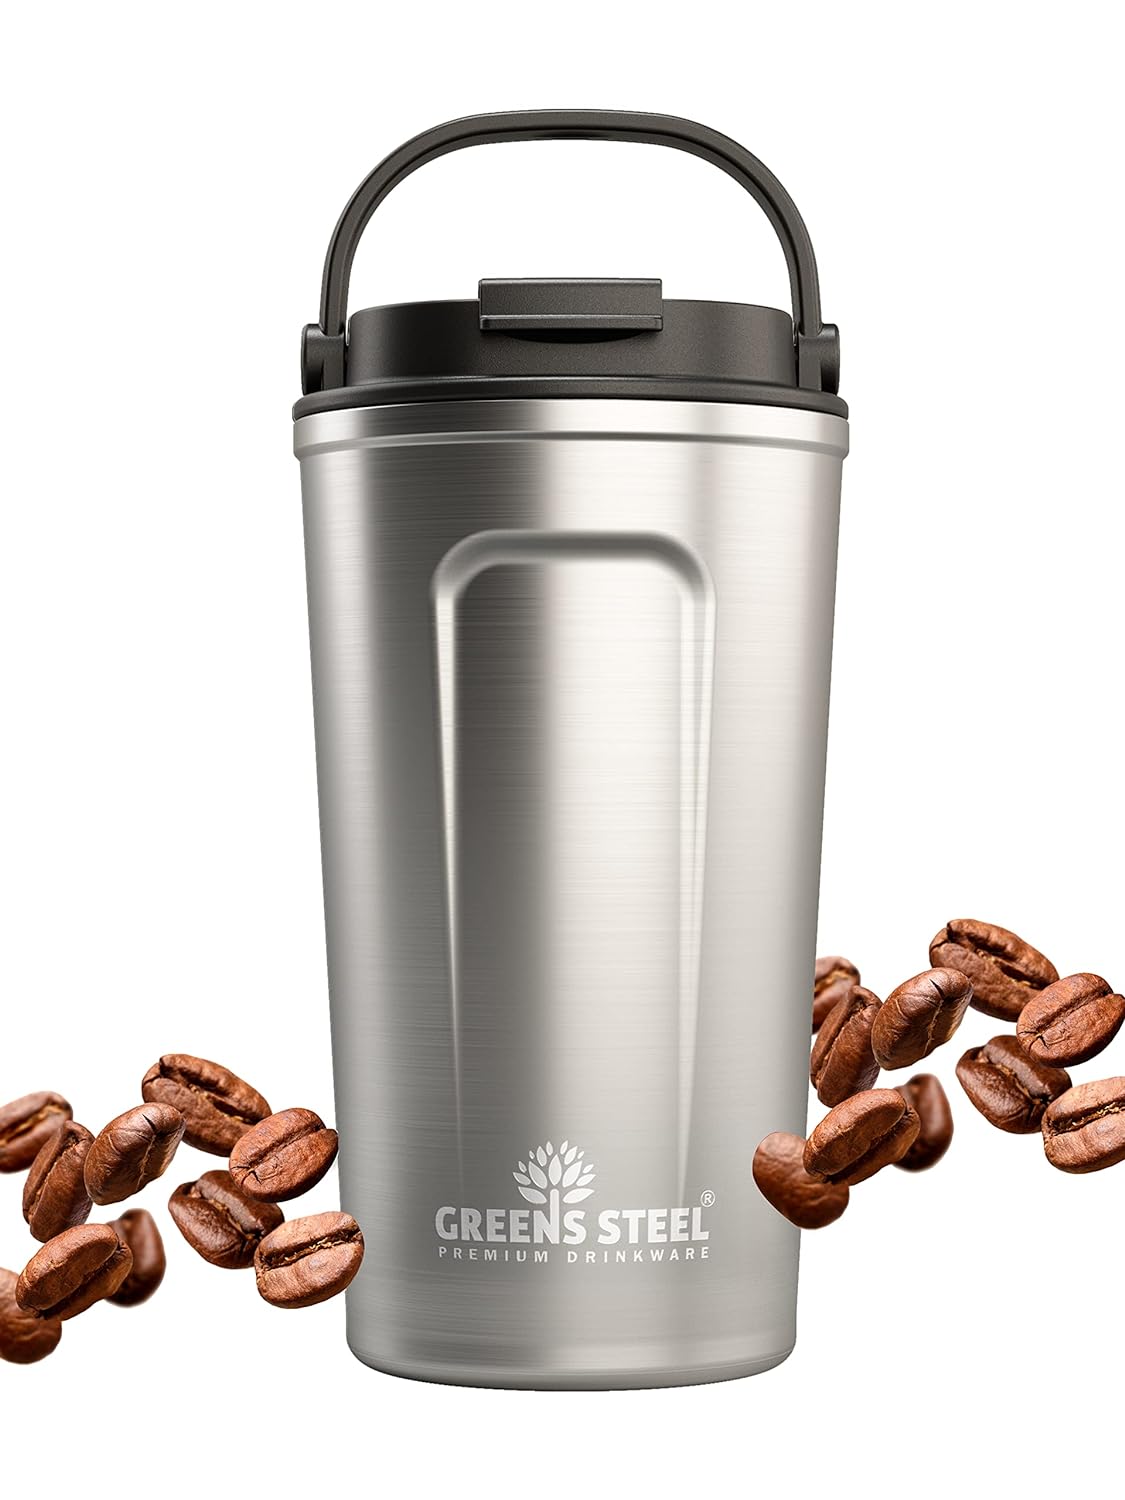 Reusable Coffee Cup with Lid and Handle - Stainless Steel Insulated Coffee Mug for Hot & Cold Drinks - Ideal Travel Mugs - 100% Leak-Proof Tumbler - 16 oz Steel